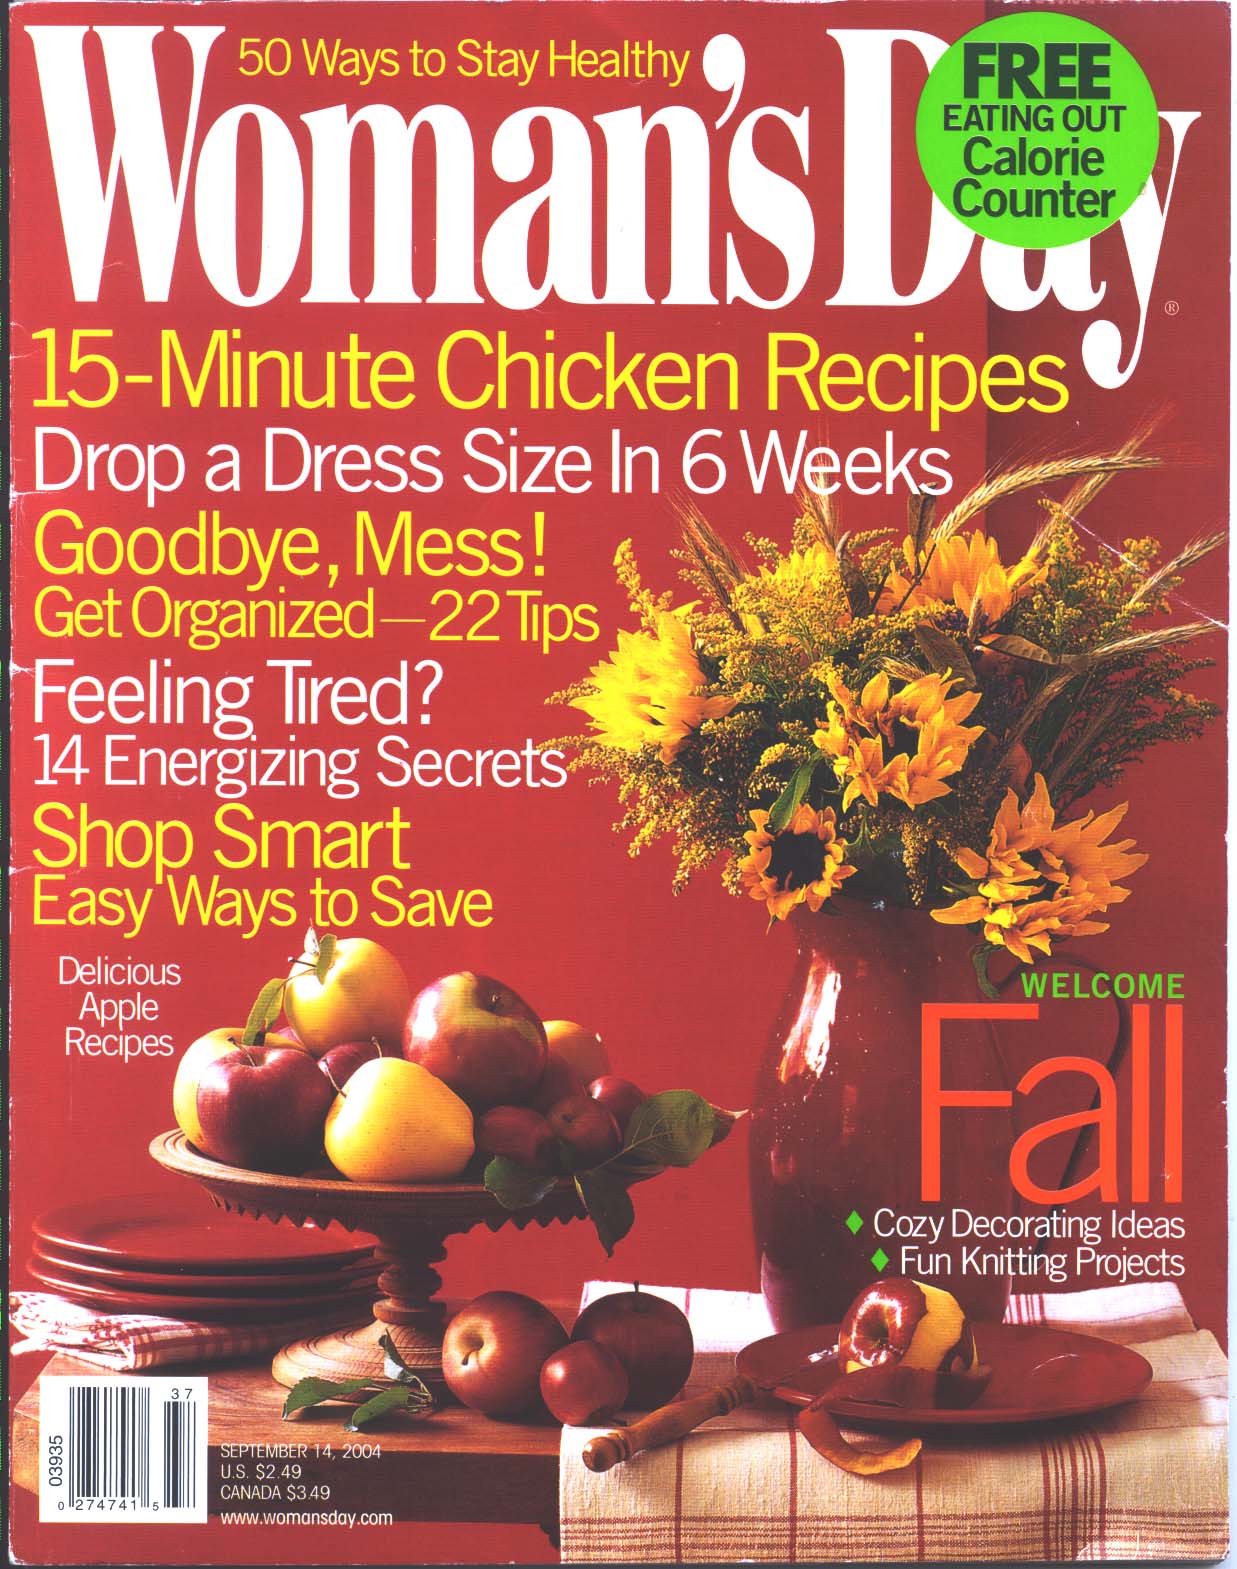 Woman's Day cover page - Sept. 14, 2004.jpg